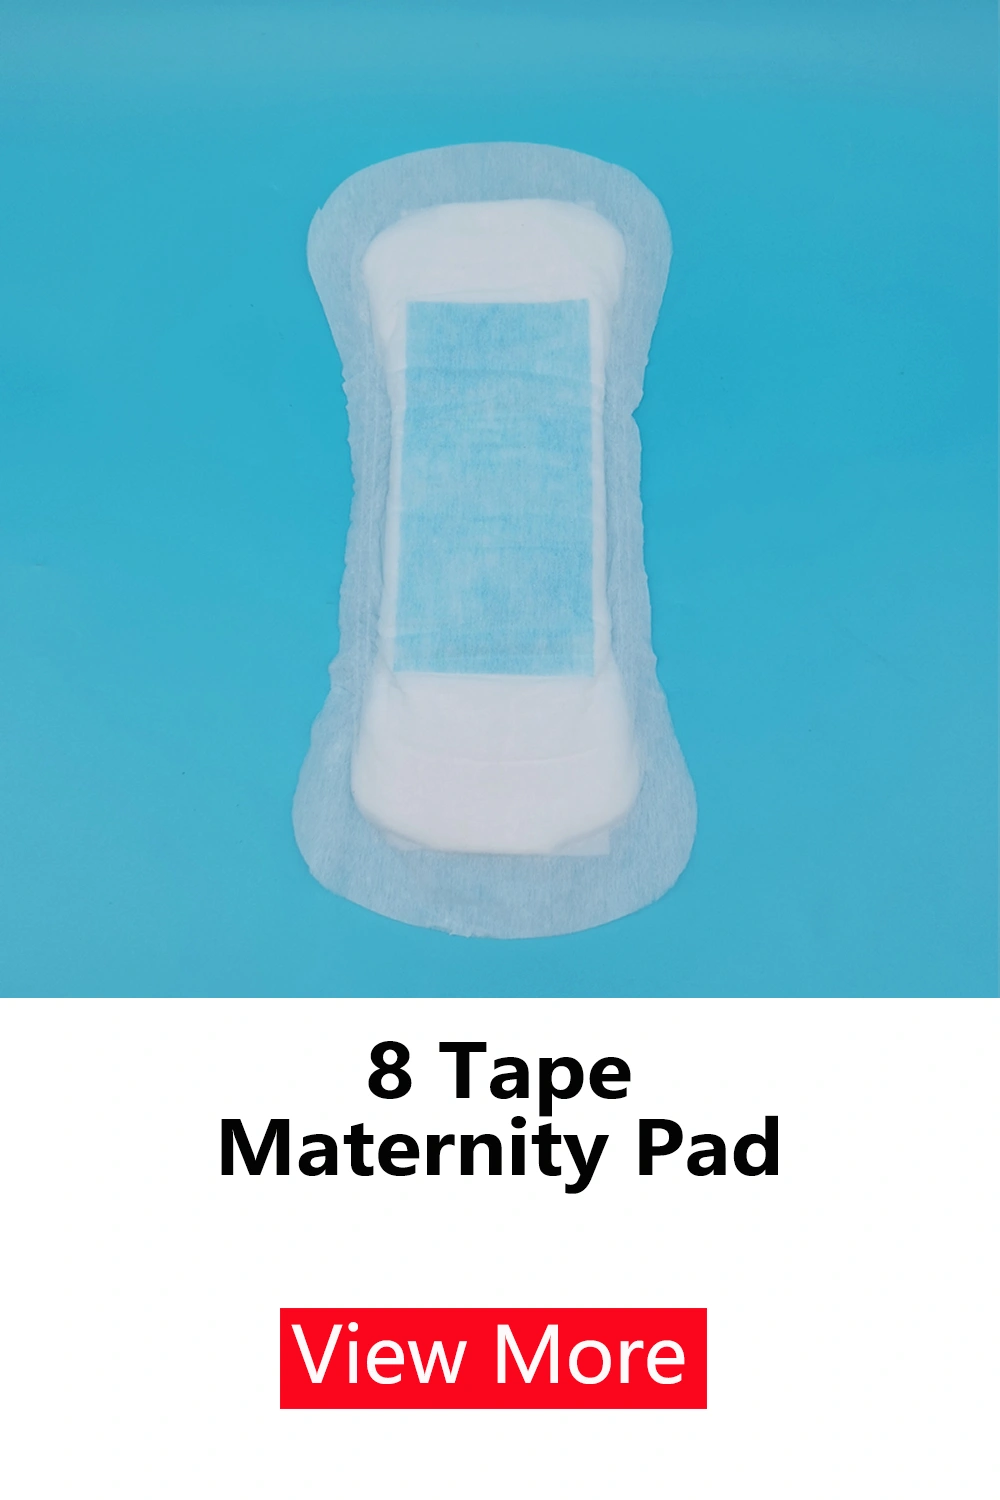 8 tape pregnancy towel picture